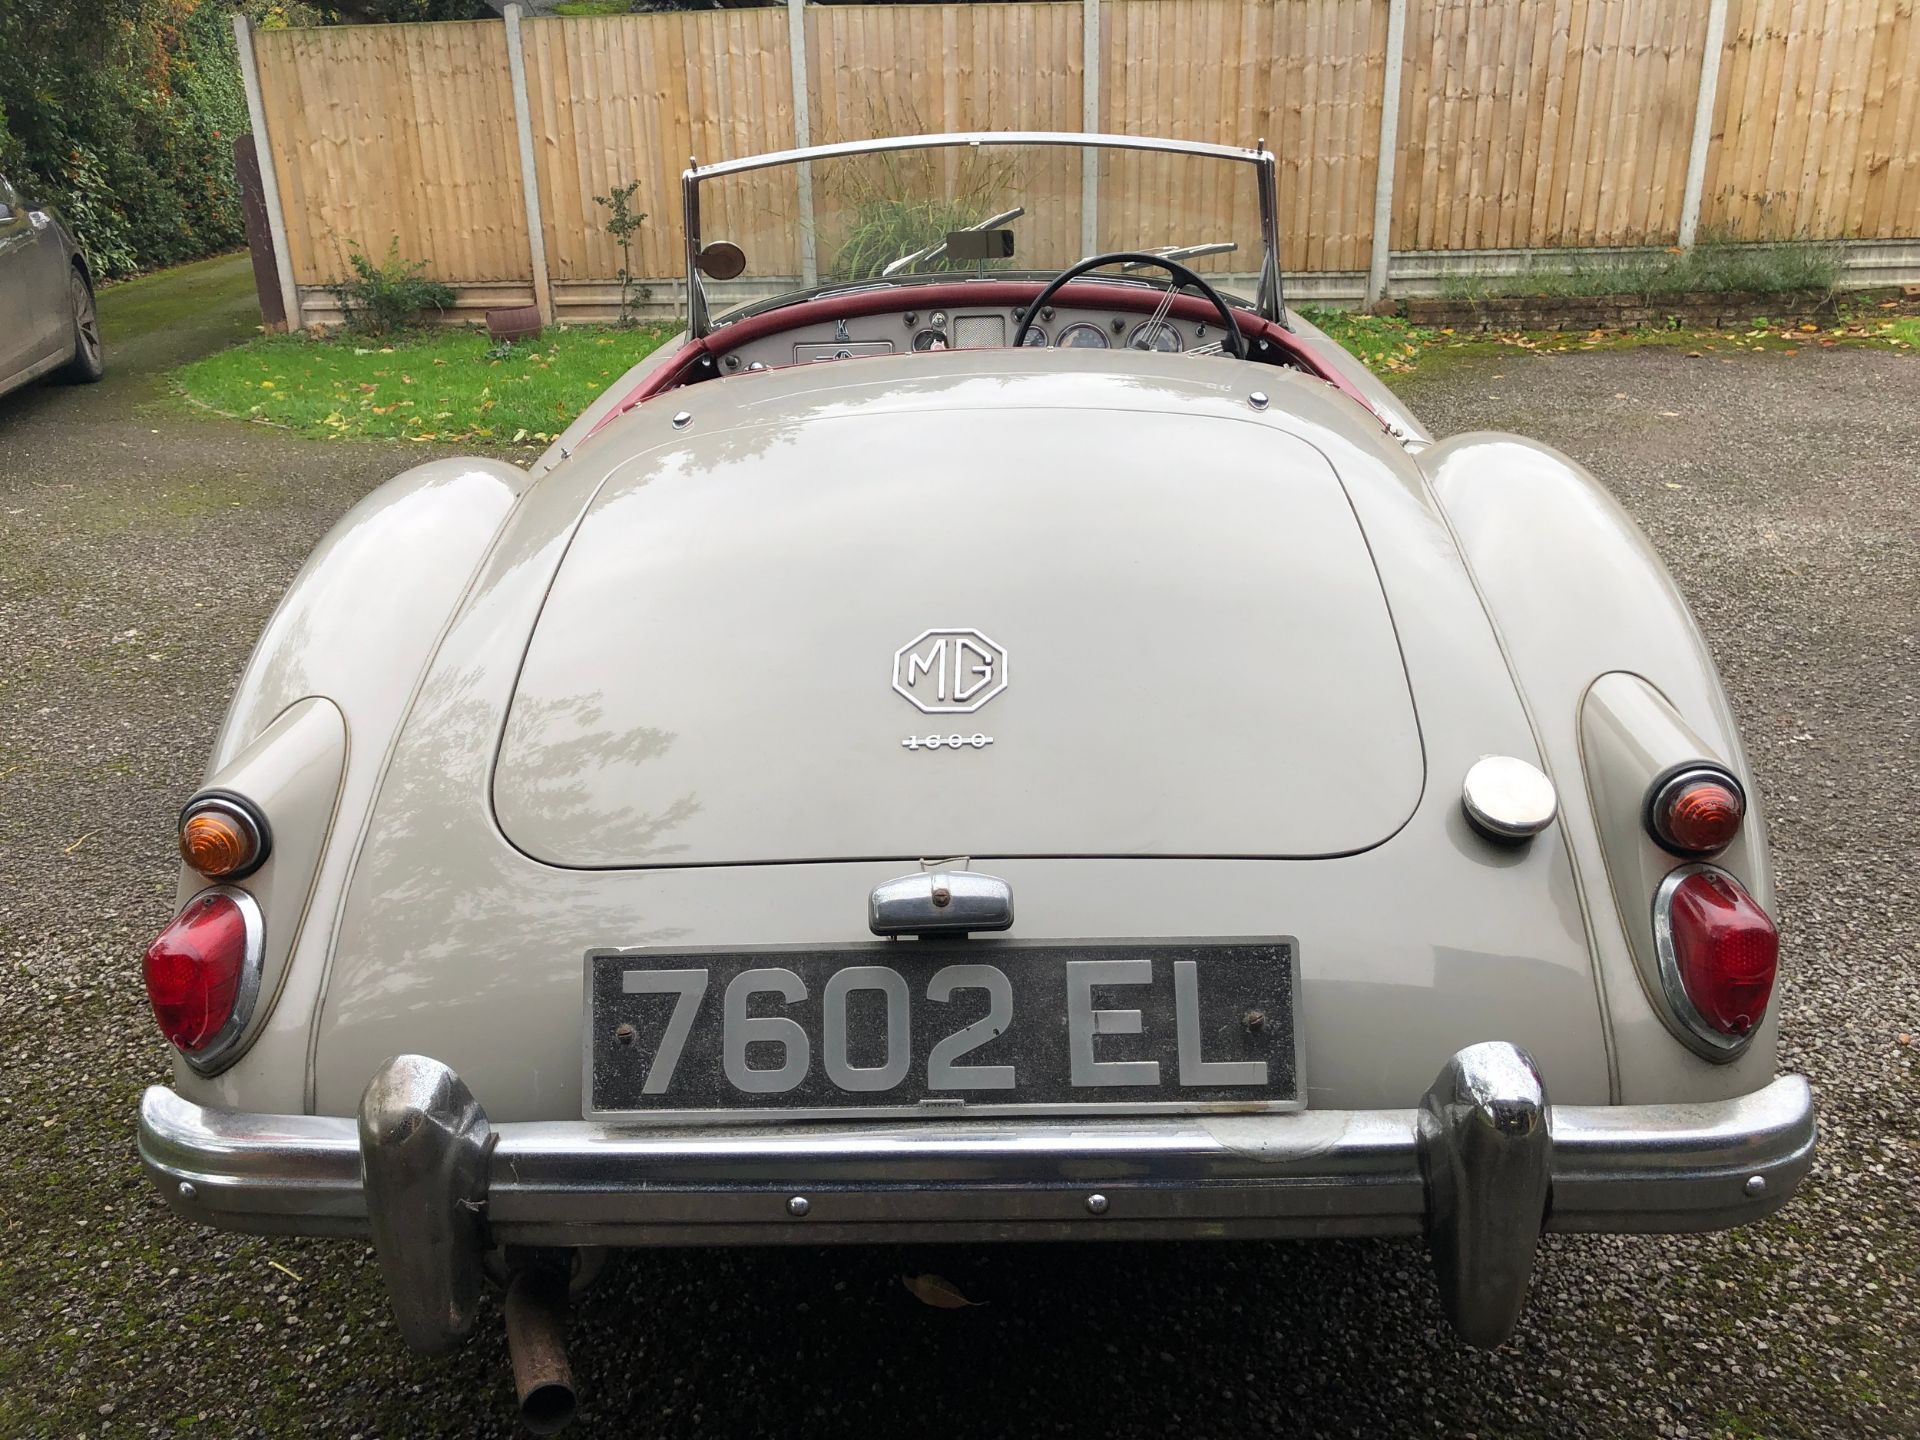 ***Regretfully Withdrawn*** 1960 MG A 1600 Roadster Registration number 7602 EL Chassis number - Image 11 of 51